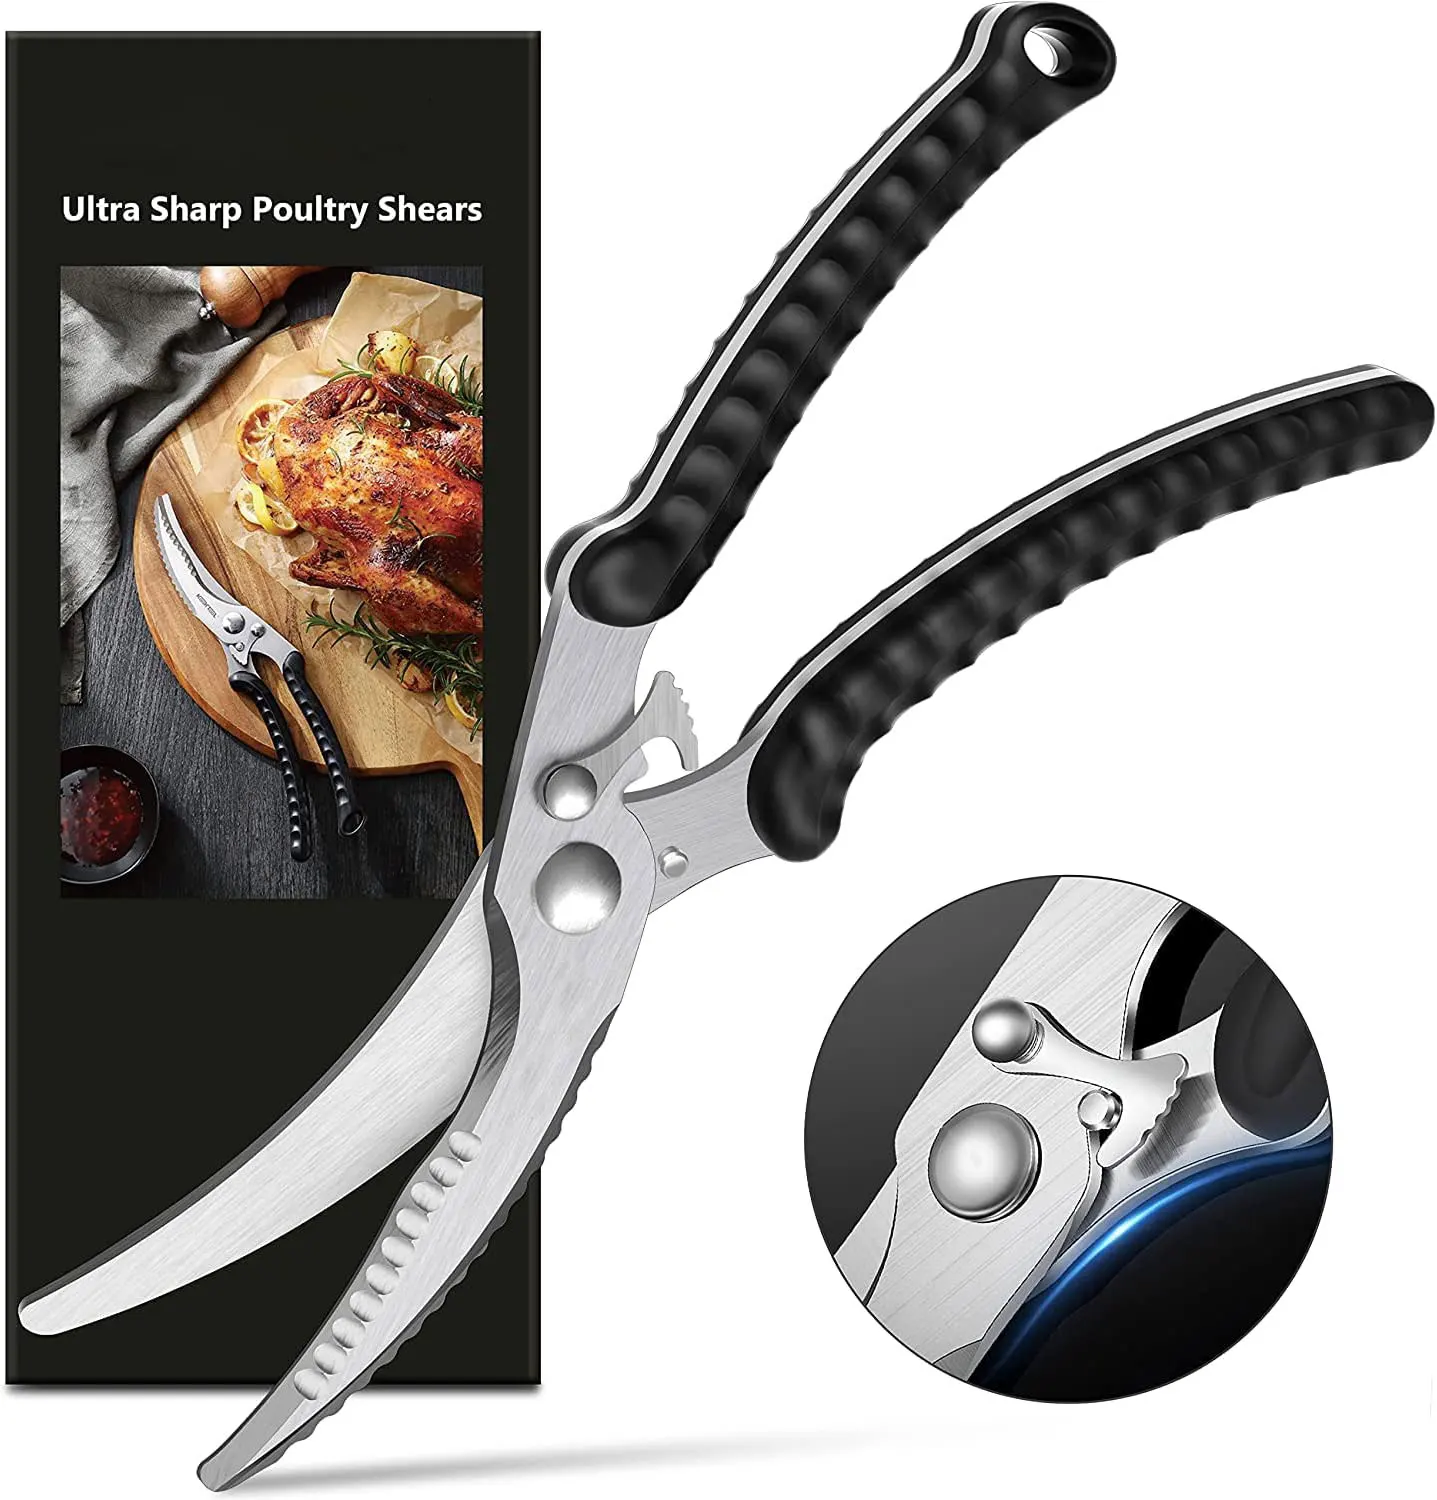 Kitchen Shears Kitchen Scissors Heavy Duty Poultry Shears for Chicken Food  Meat and Cooking Dishwasher Safe, Spring-loaded Full Steel Handle 